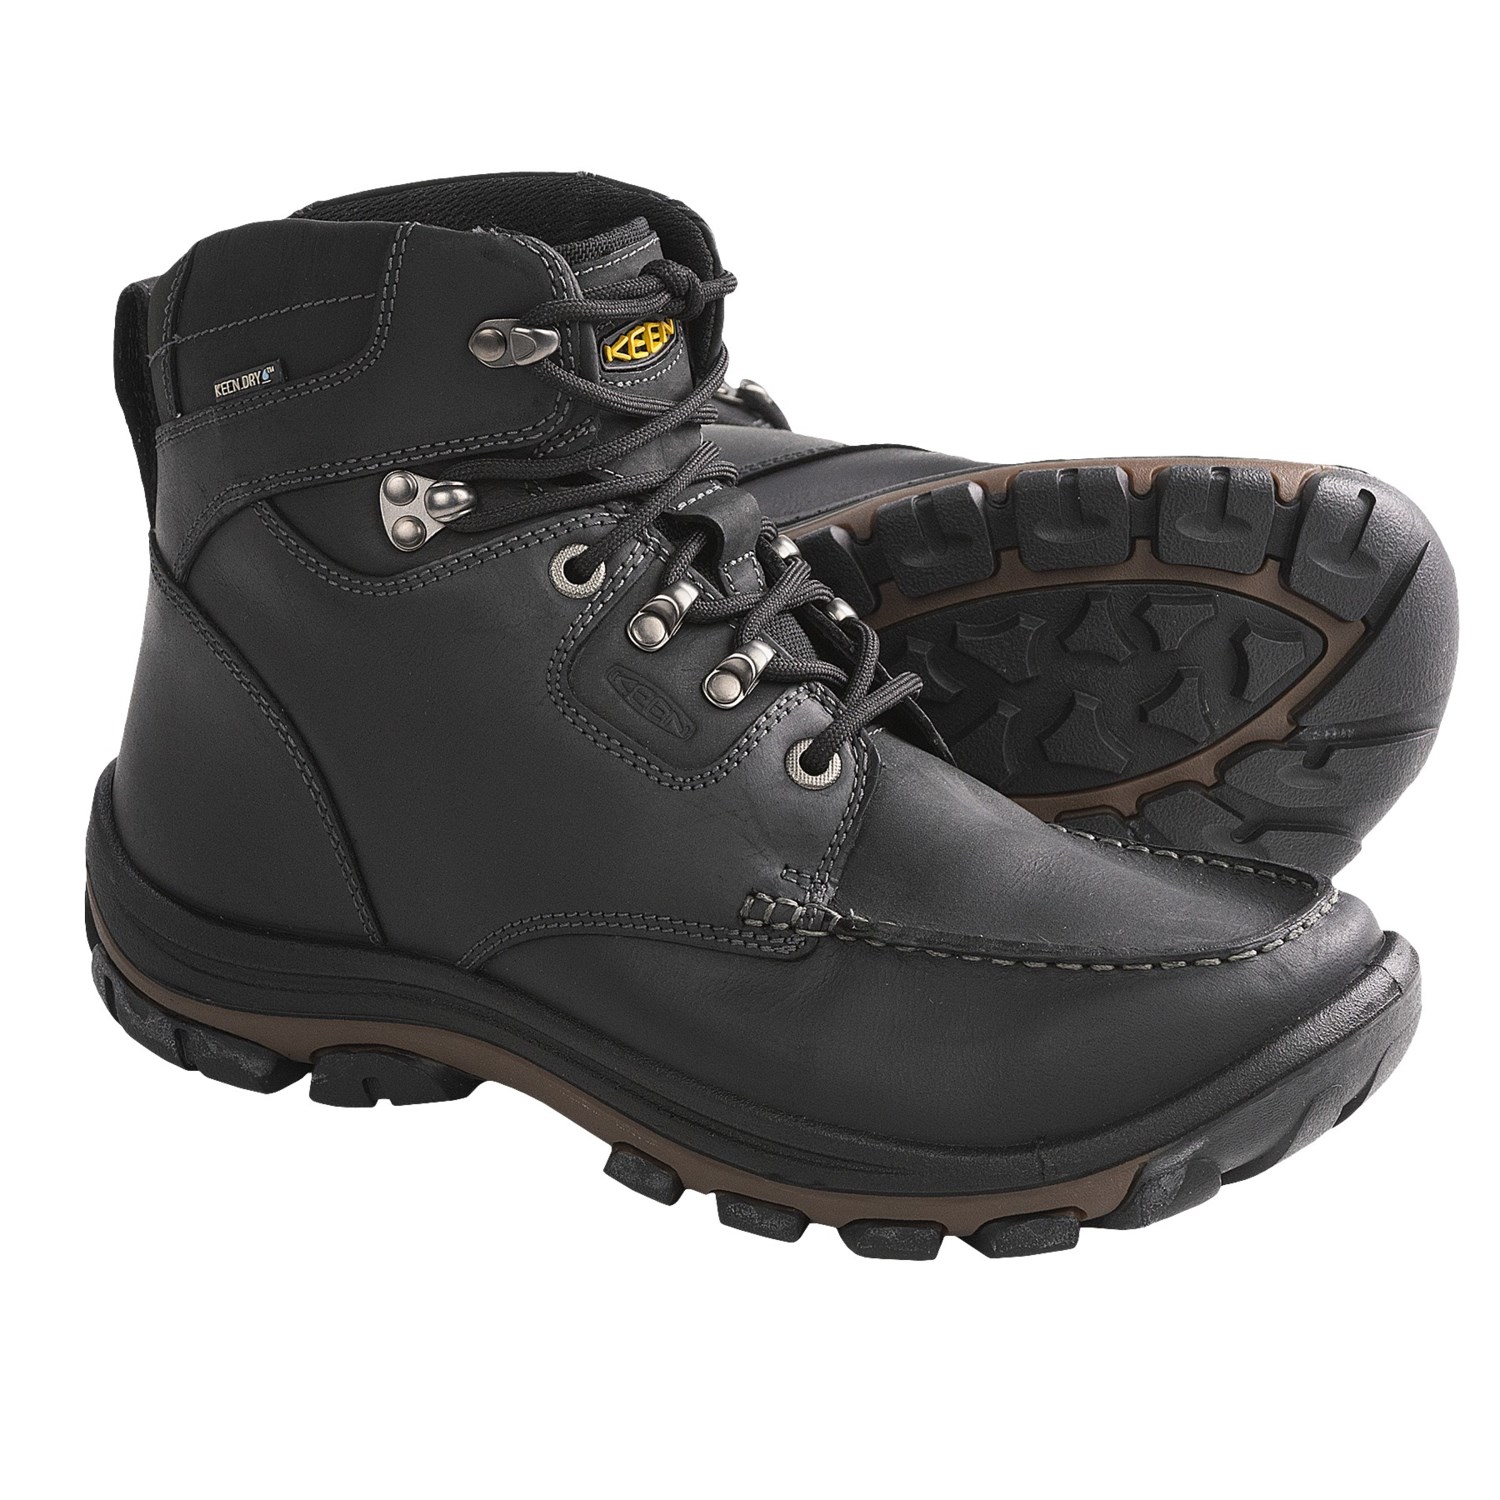 Keen NoPo Boots - Waterproof, Leather (For Men) - Save 29%